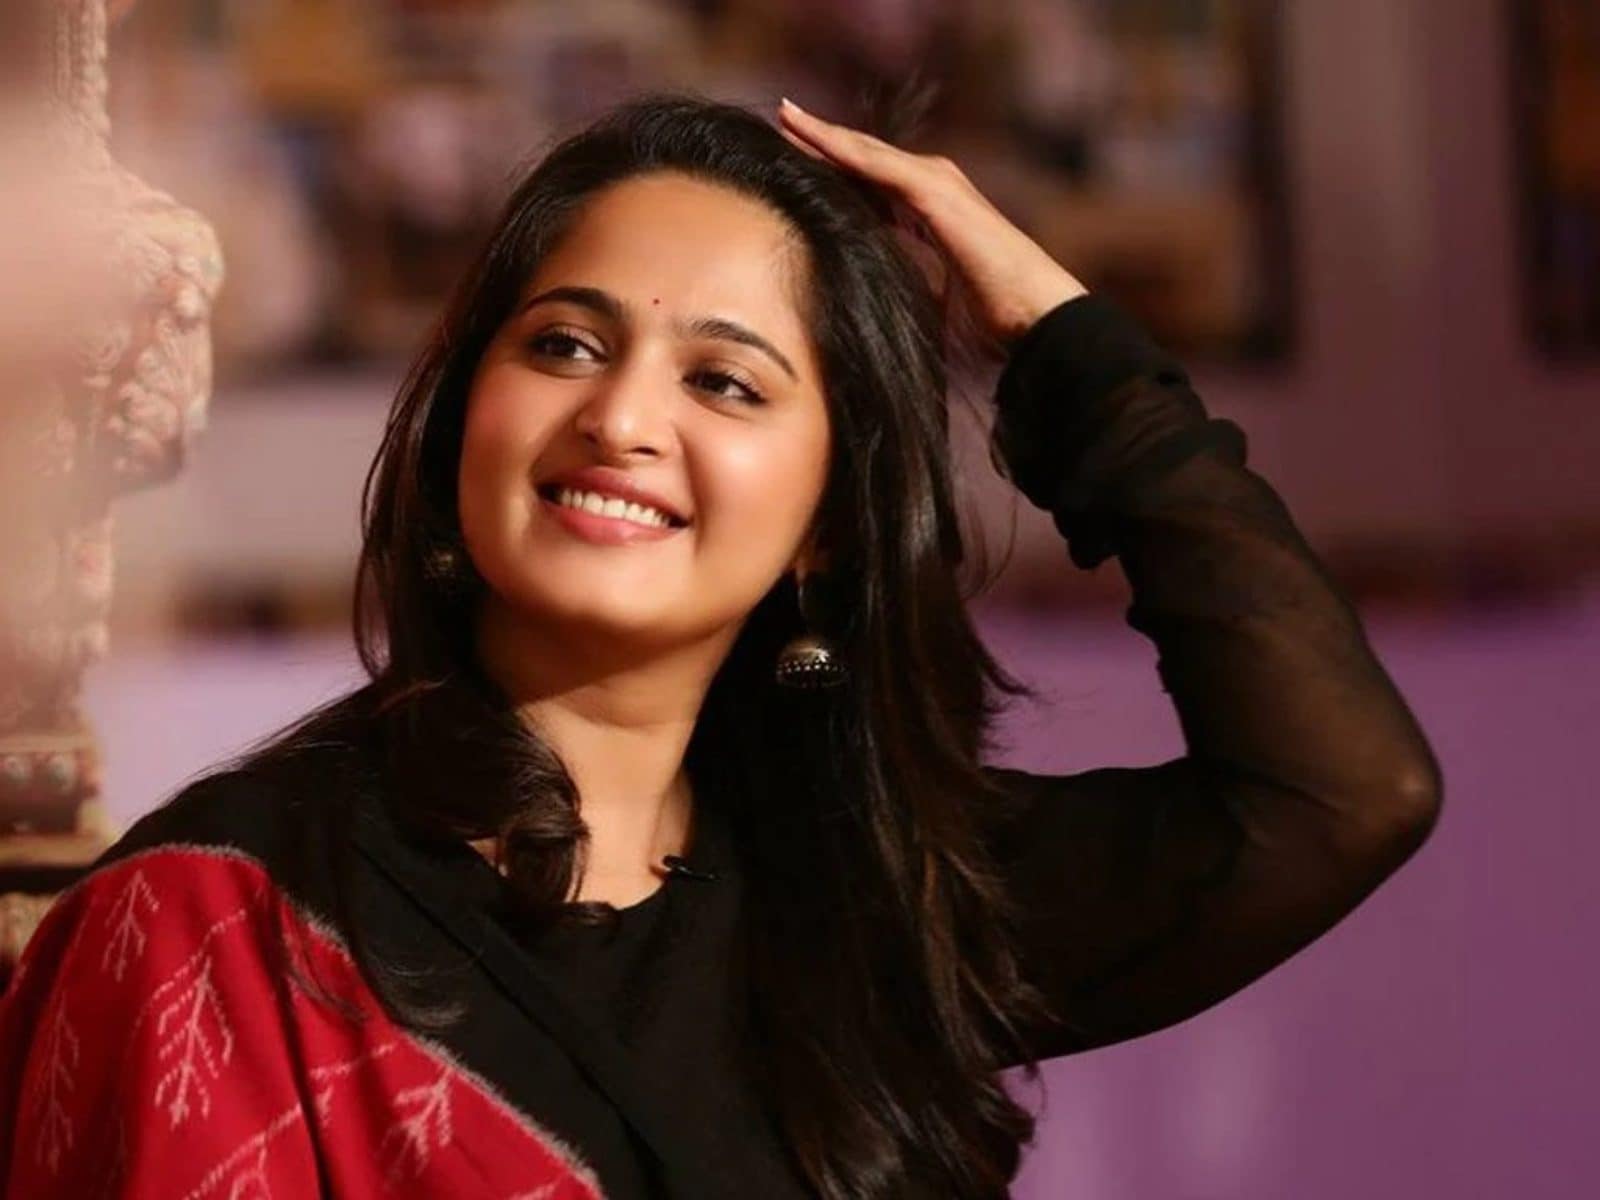 Anushka Shetty Sexvidio - When Actress Anushka Shetty Revealed She Fell In Love With This Former  Indian Cricketer - News18